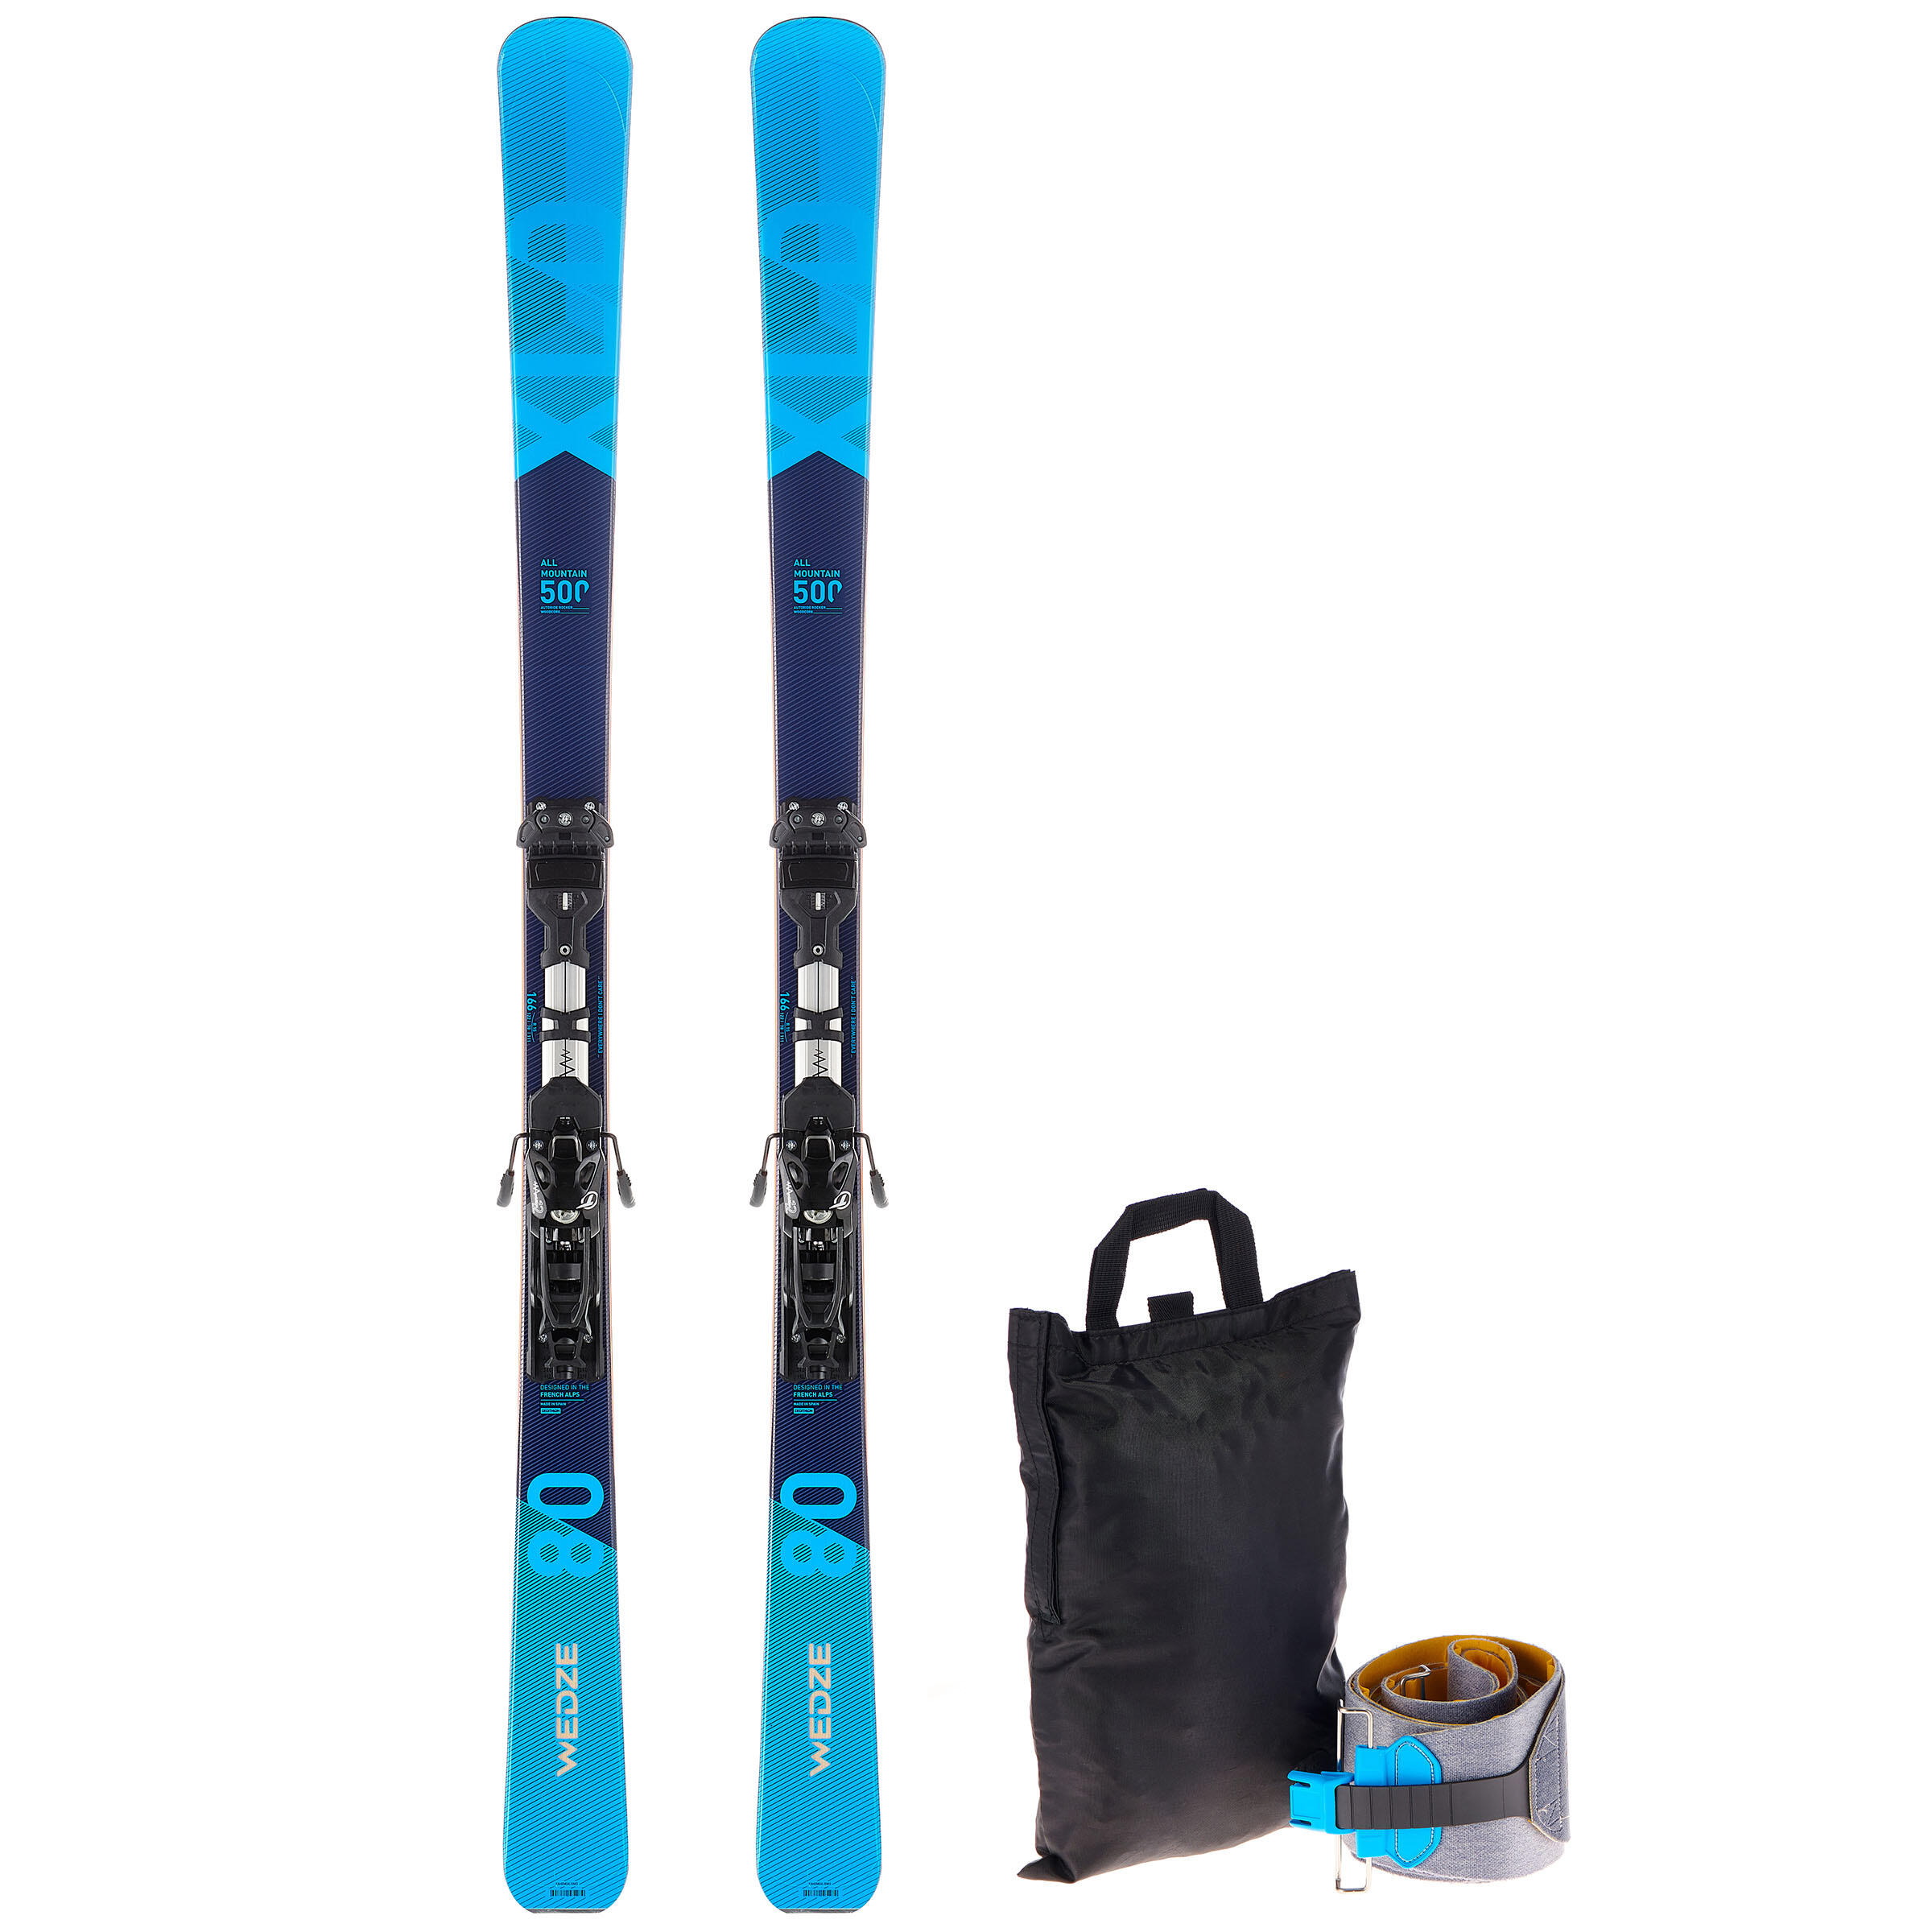 Image of Touring Skis with Bindings and Skins - XLD 500